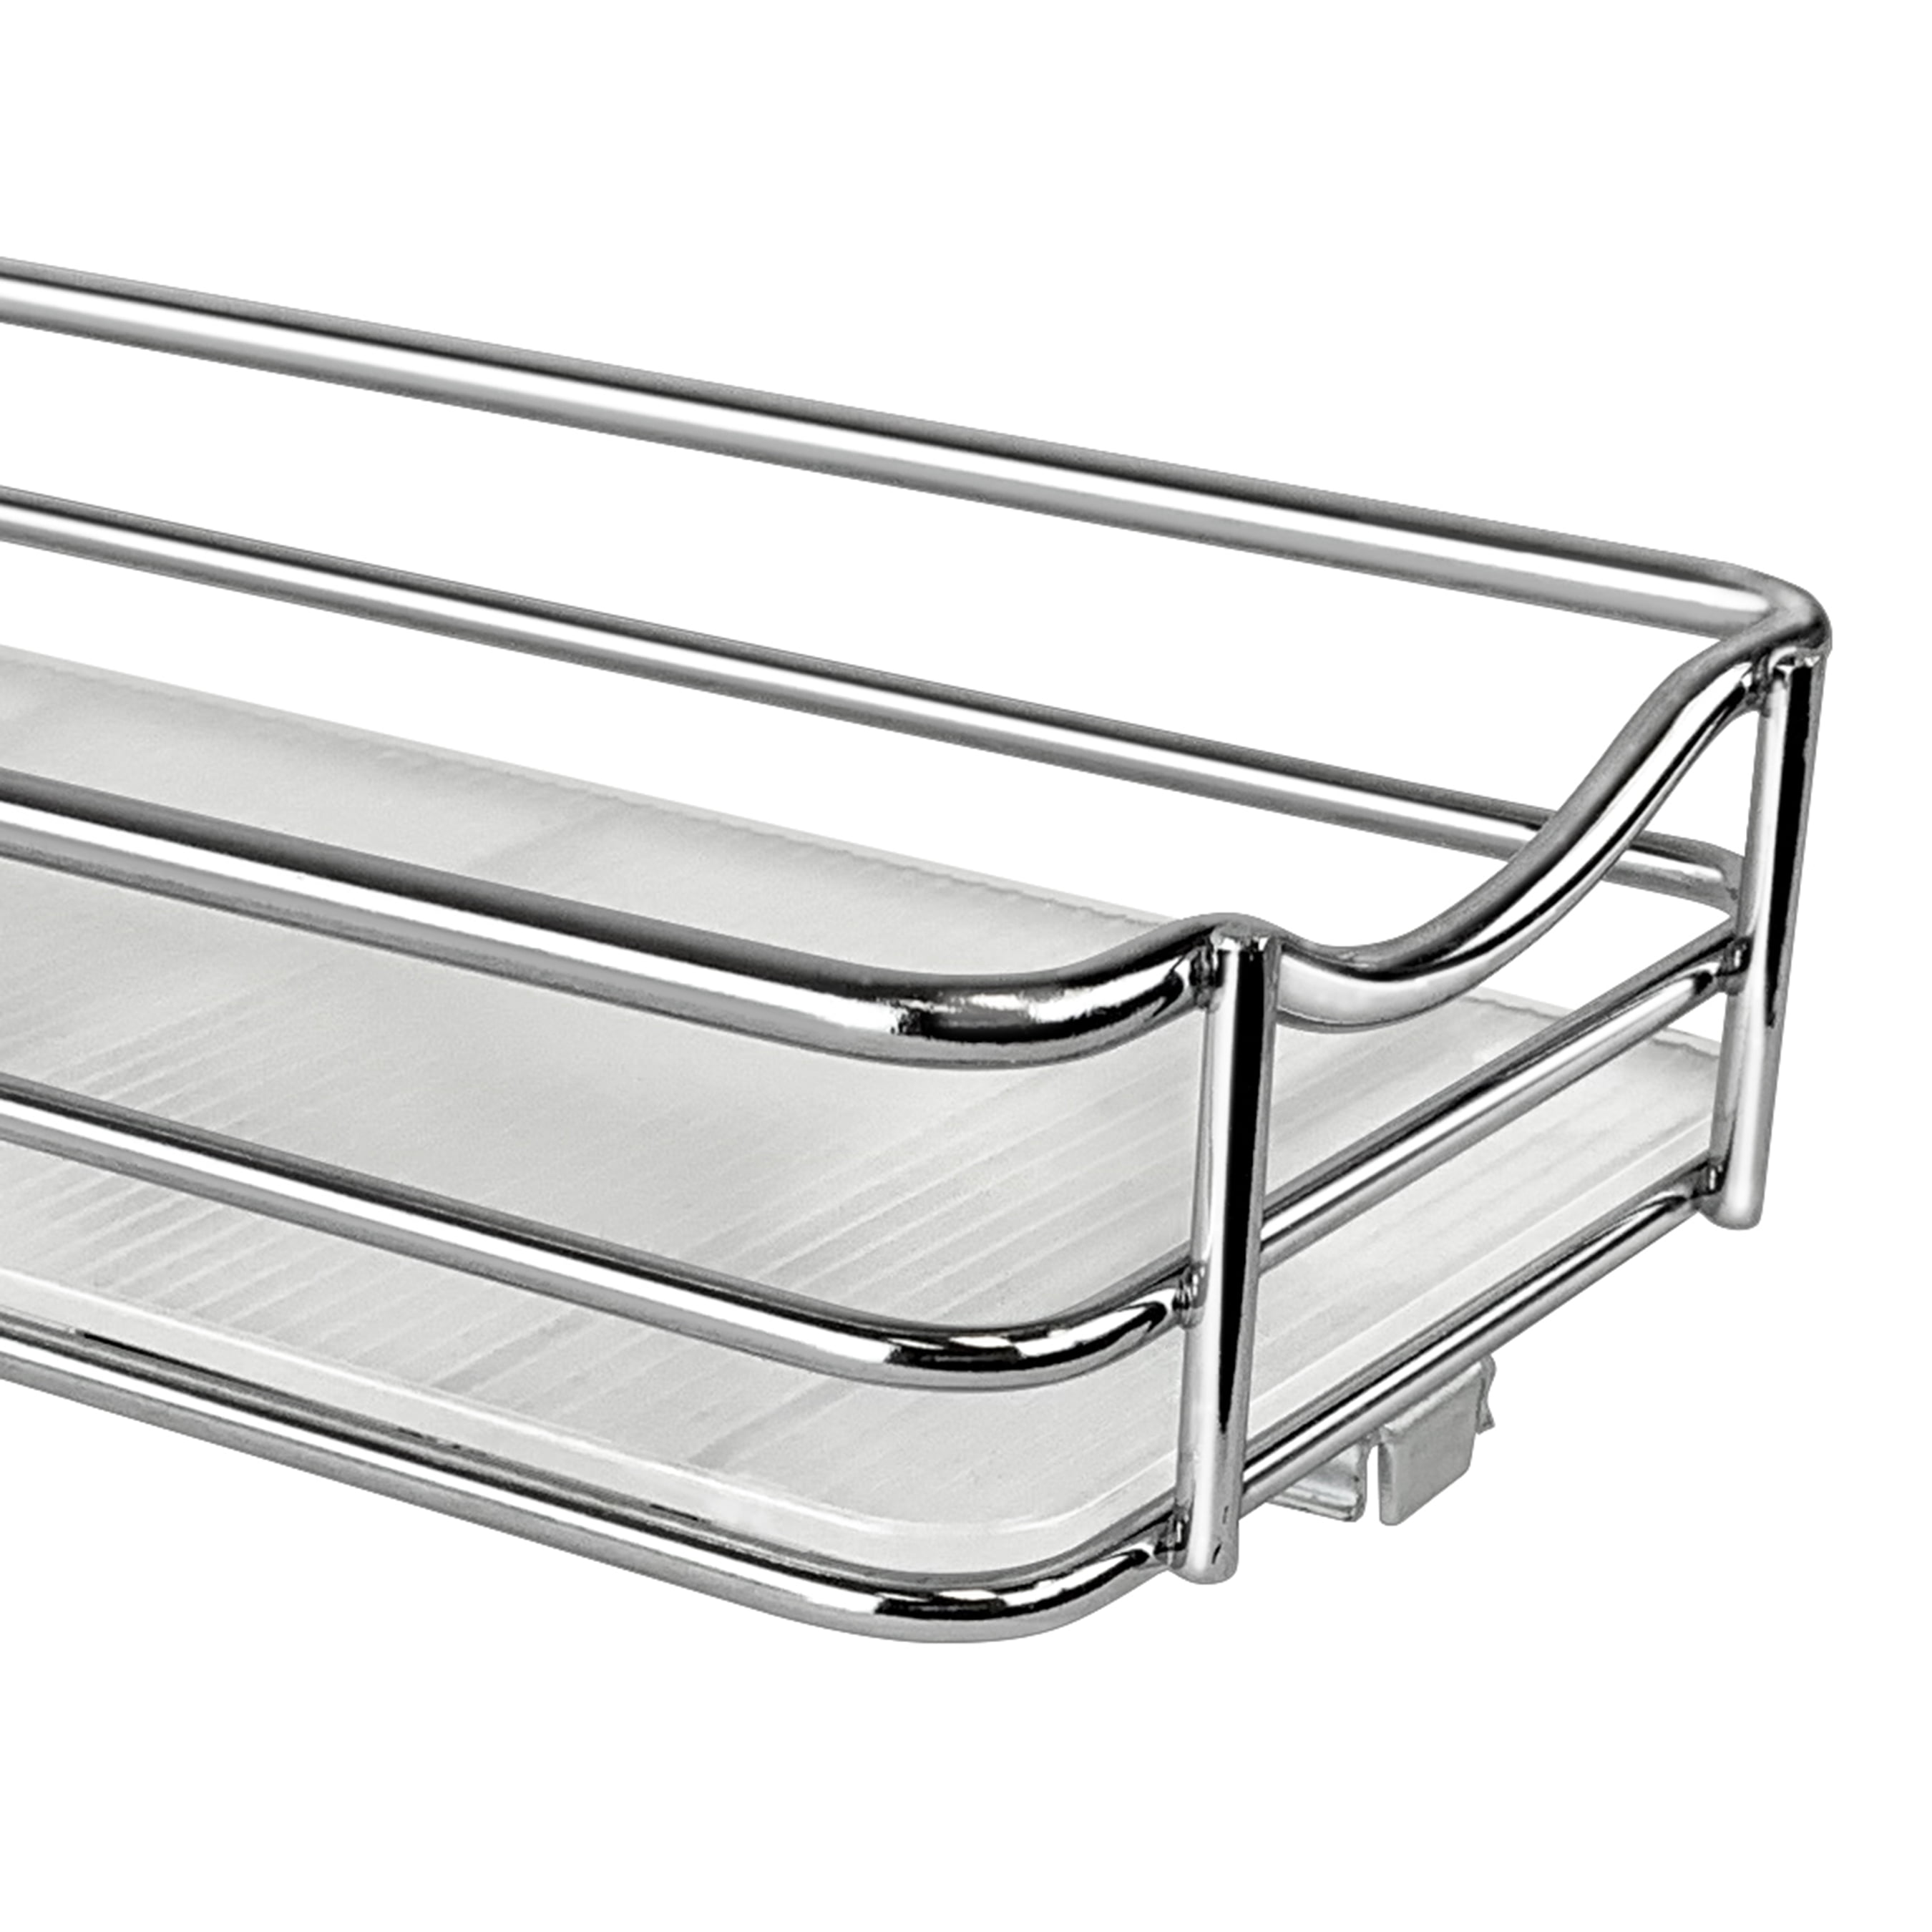 Lynk Professional 8-1/4 in. Wide - Double Silver Chrome Slide Out Spice Rack Pull Out Cabinet Organizer